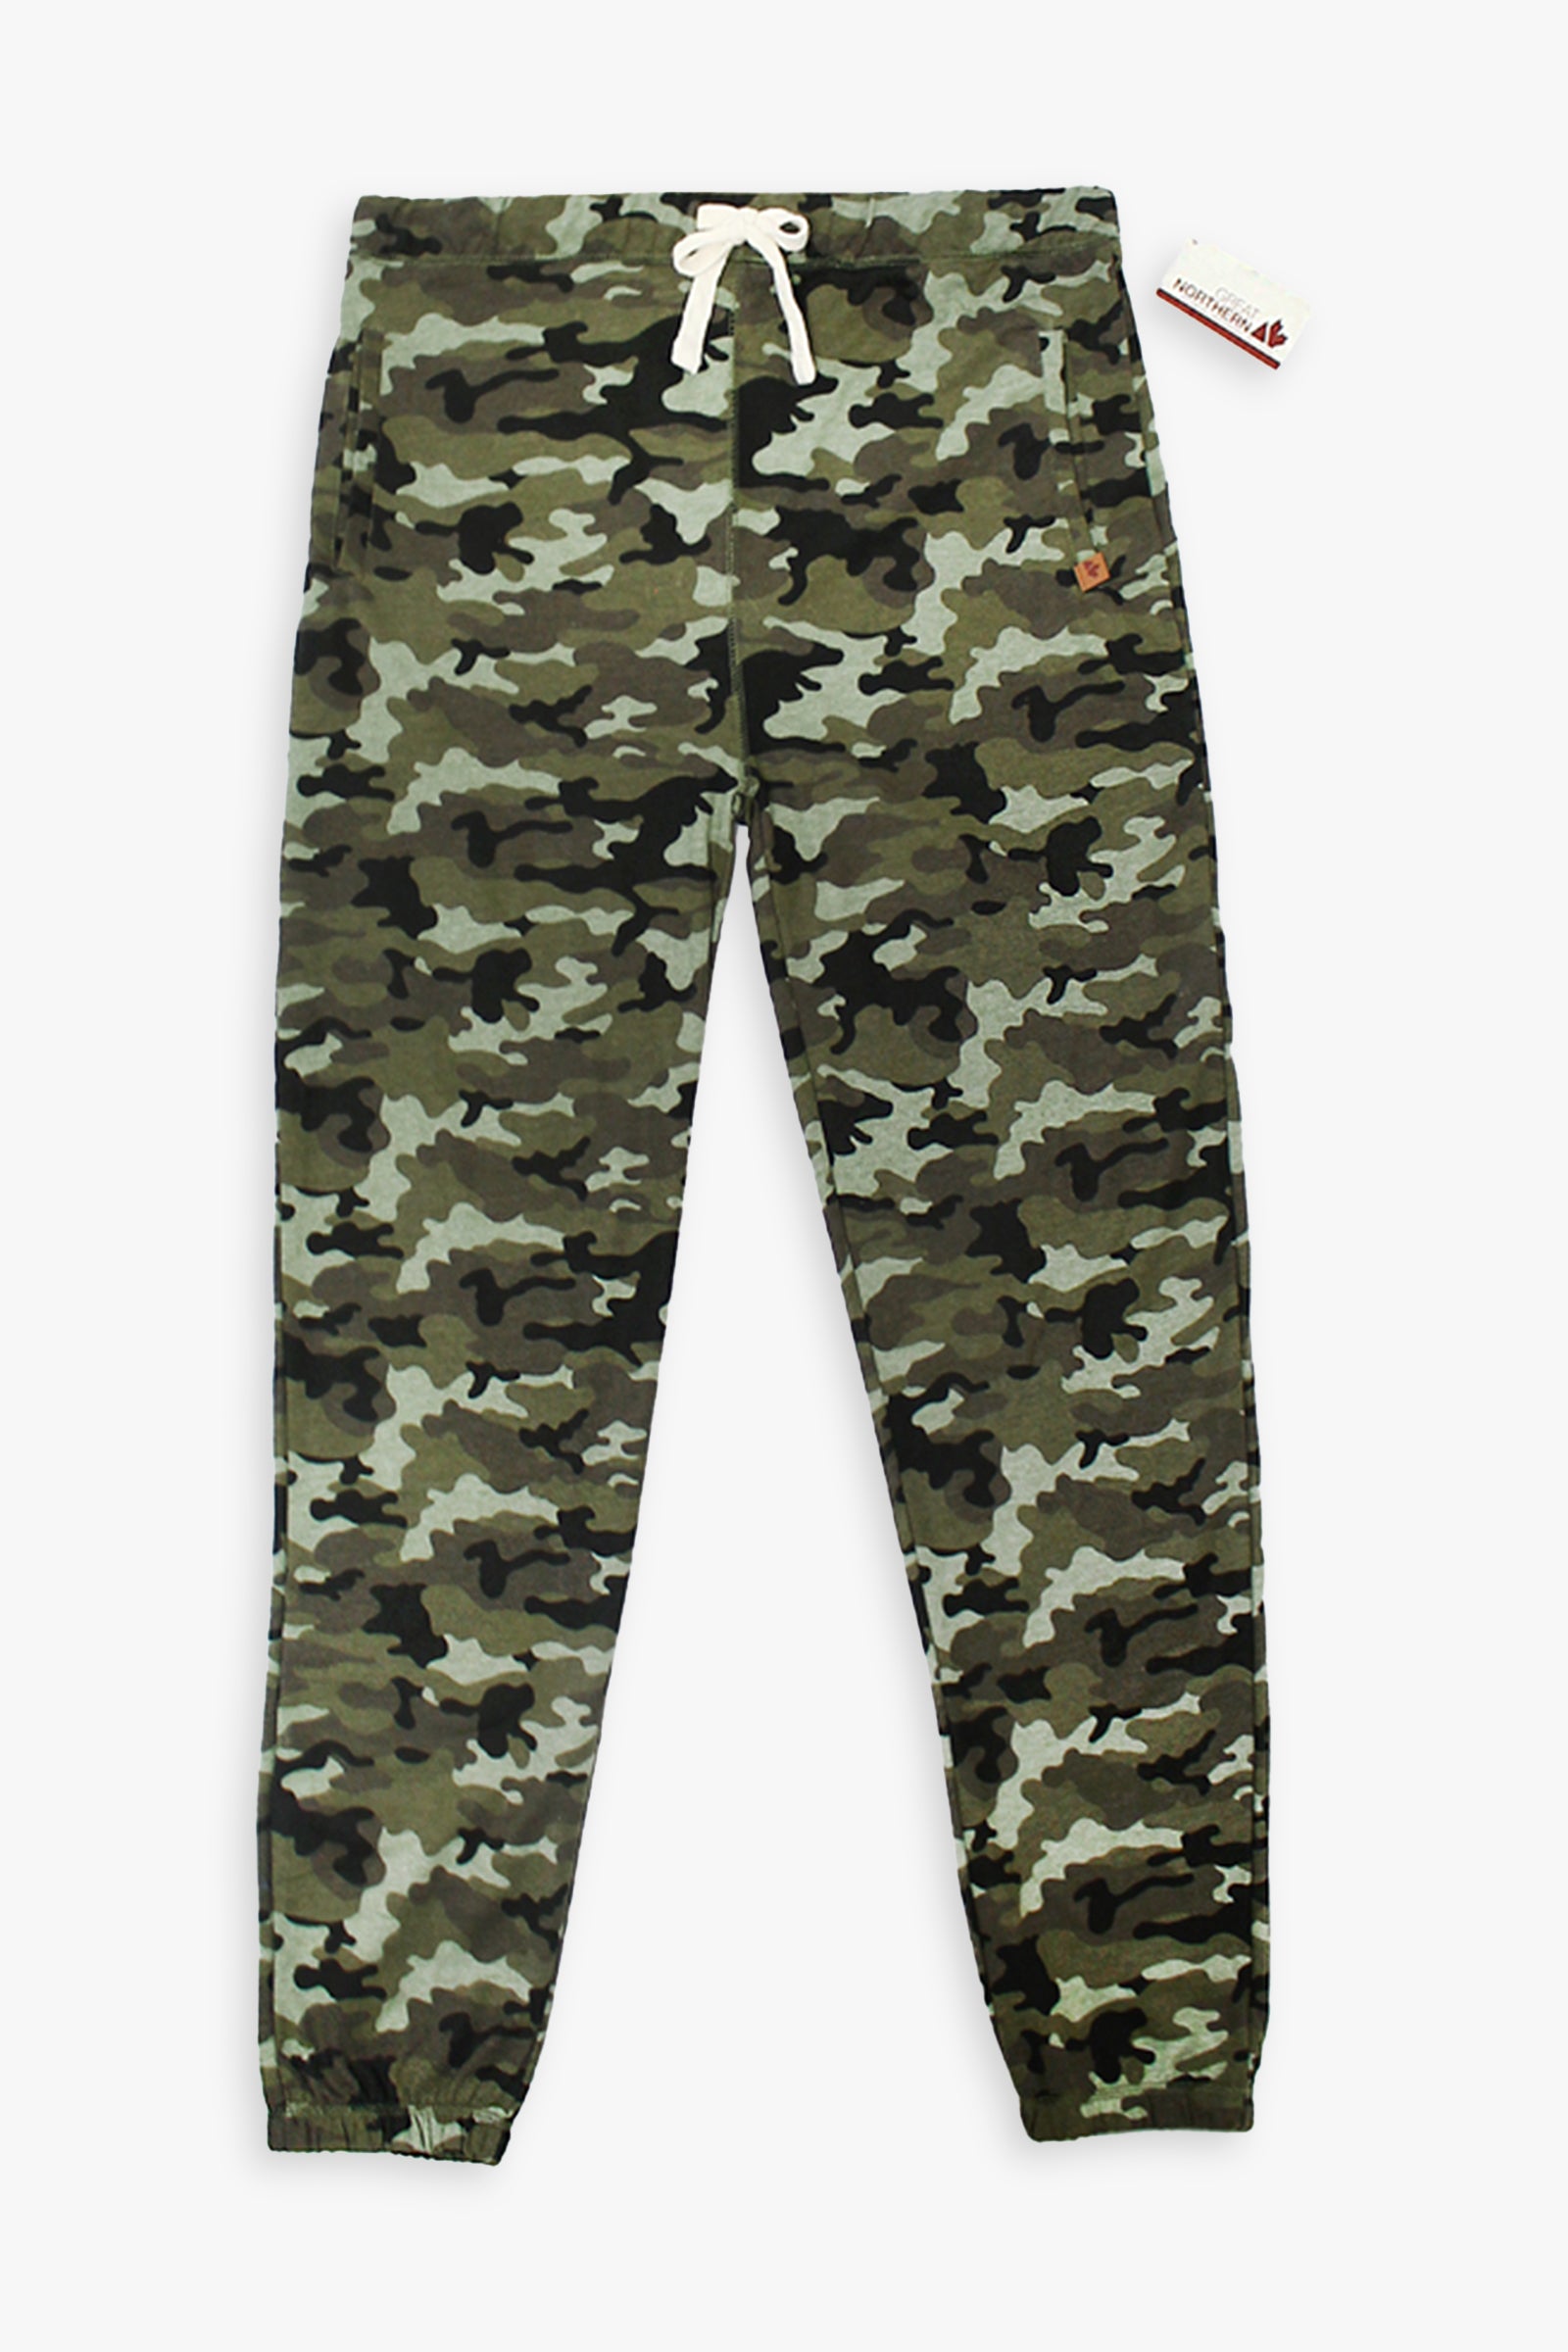 Great Northern Ladies Camouflage French Terry Sweatpants